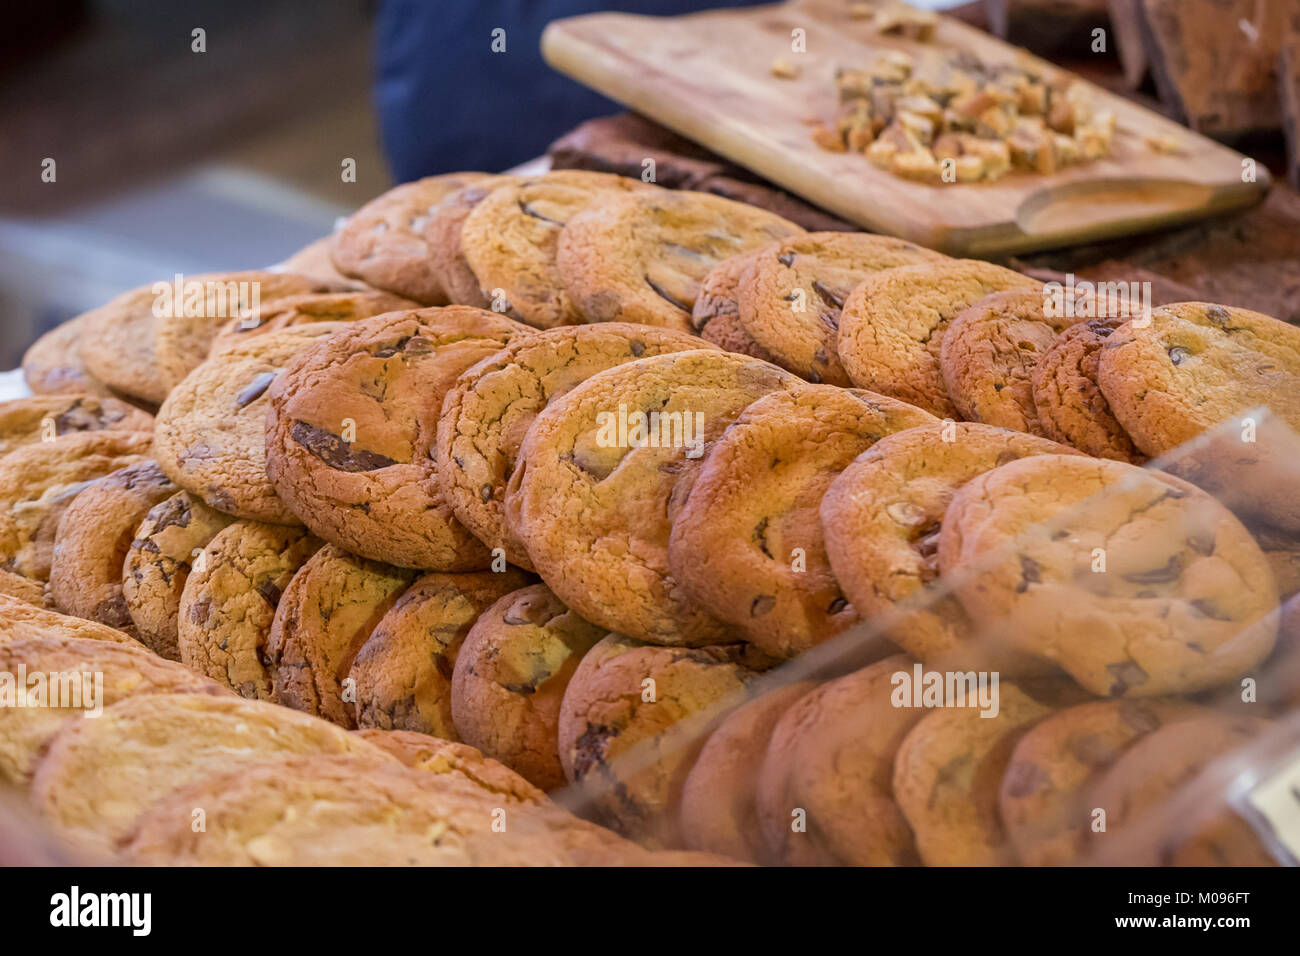 Artisan Chocolate Chip Cookies on display on a market stall in Borough Market, London Stock Photo